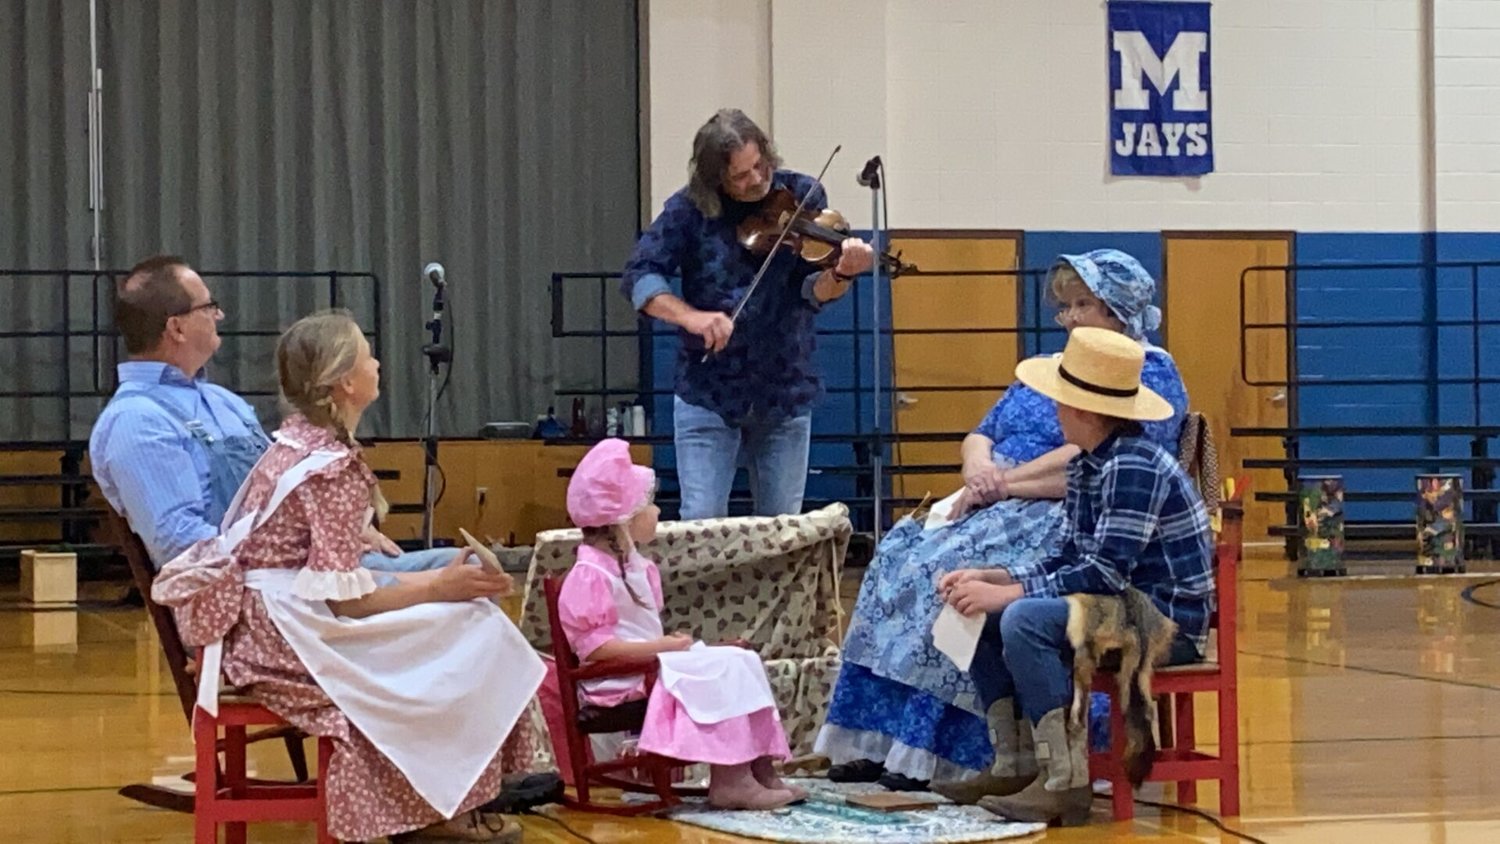 Justin David set the tone for the Pioneer Day program by playing his fiddle to start it off. David first performed for the Pioneer Day crowd at the inaugural event in May of ’91 as a Marshfield High School junior.